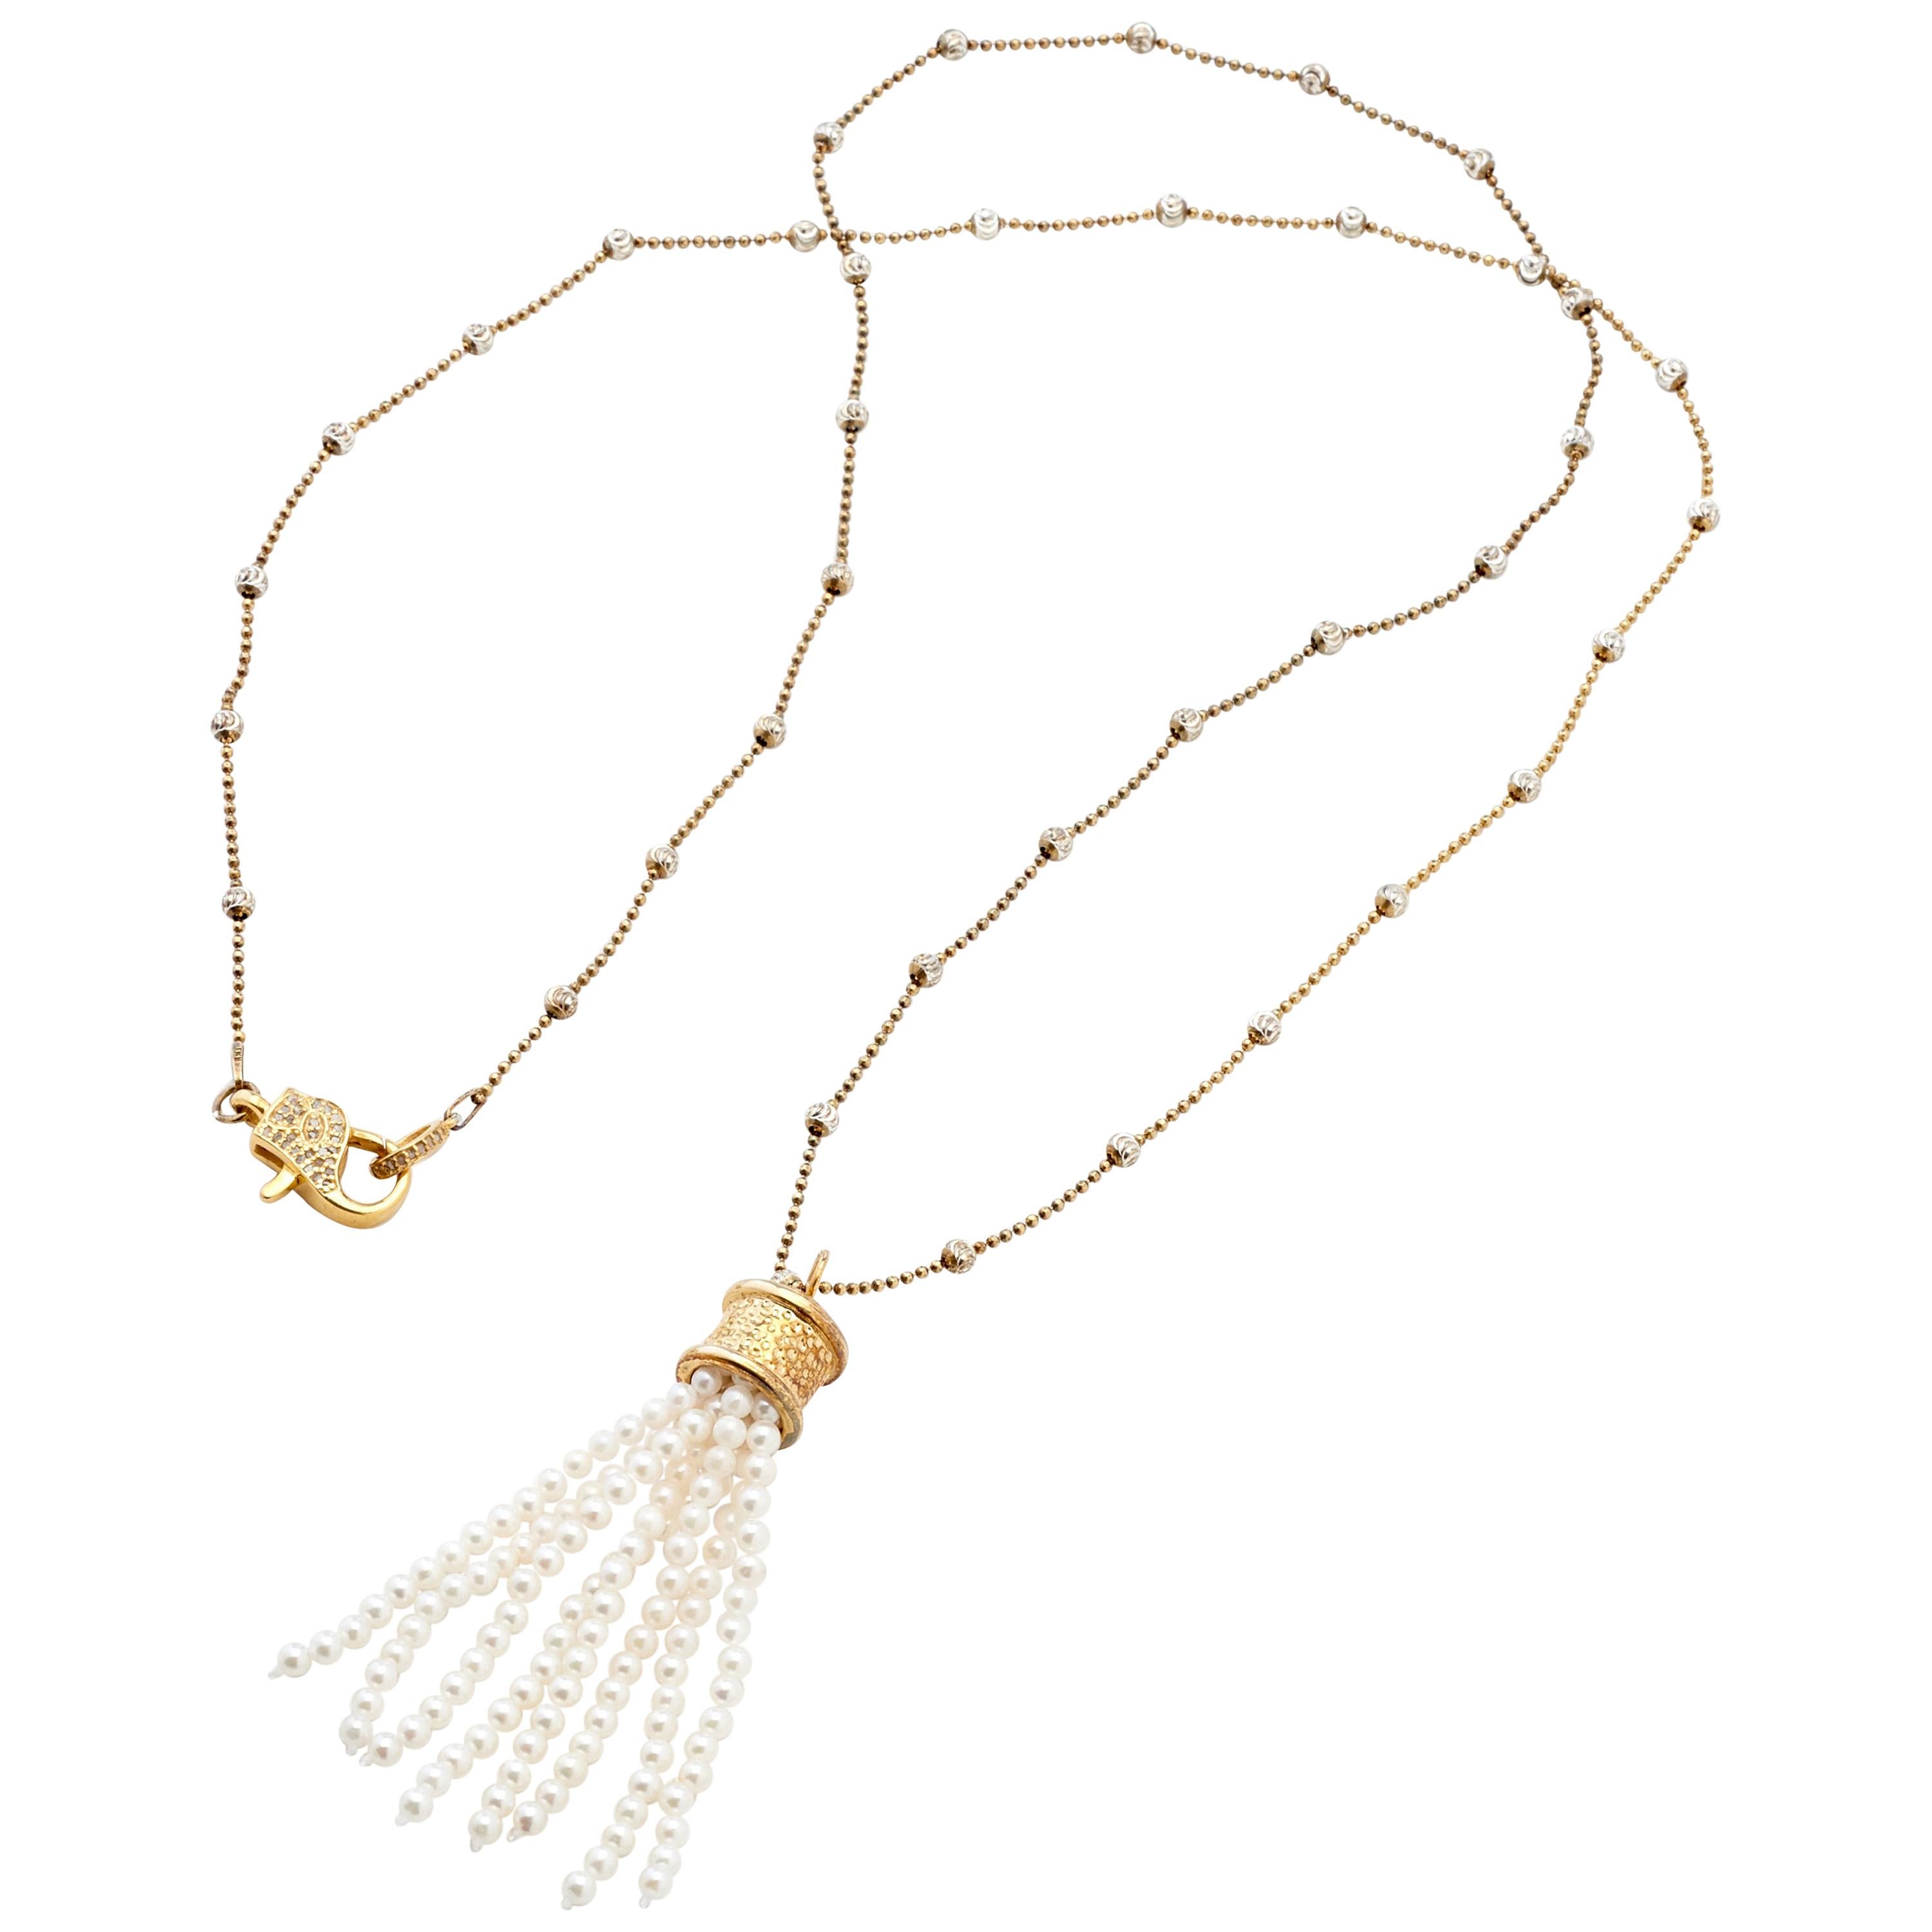 With an elegant fresh look, this beaded chain of fourteen karat yellow gold on sterling silver leads to a flirty tassel pendant with over 130 hand-strung 2-1/2mm genuine Akoya Pearls. The sterling beaded stations are cut with a half moon ridge